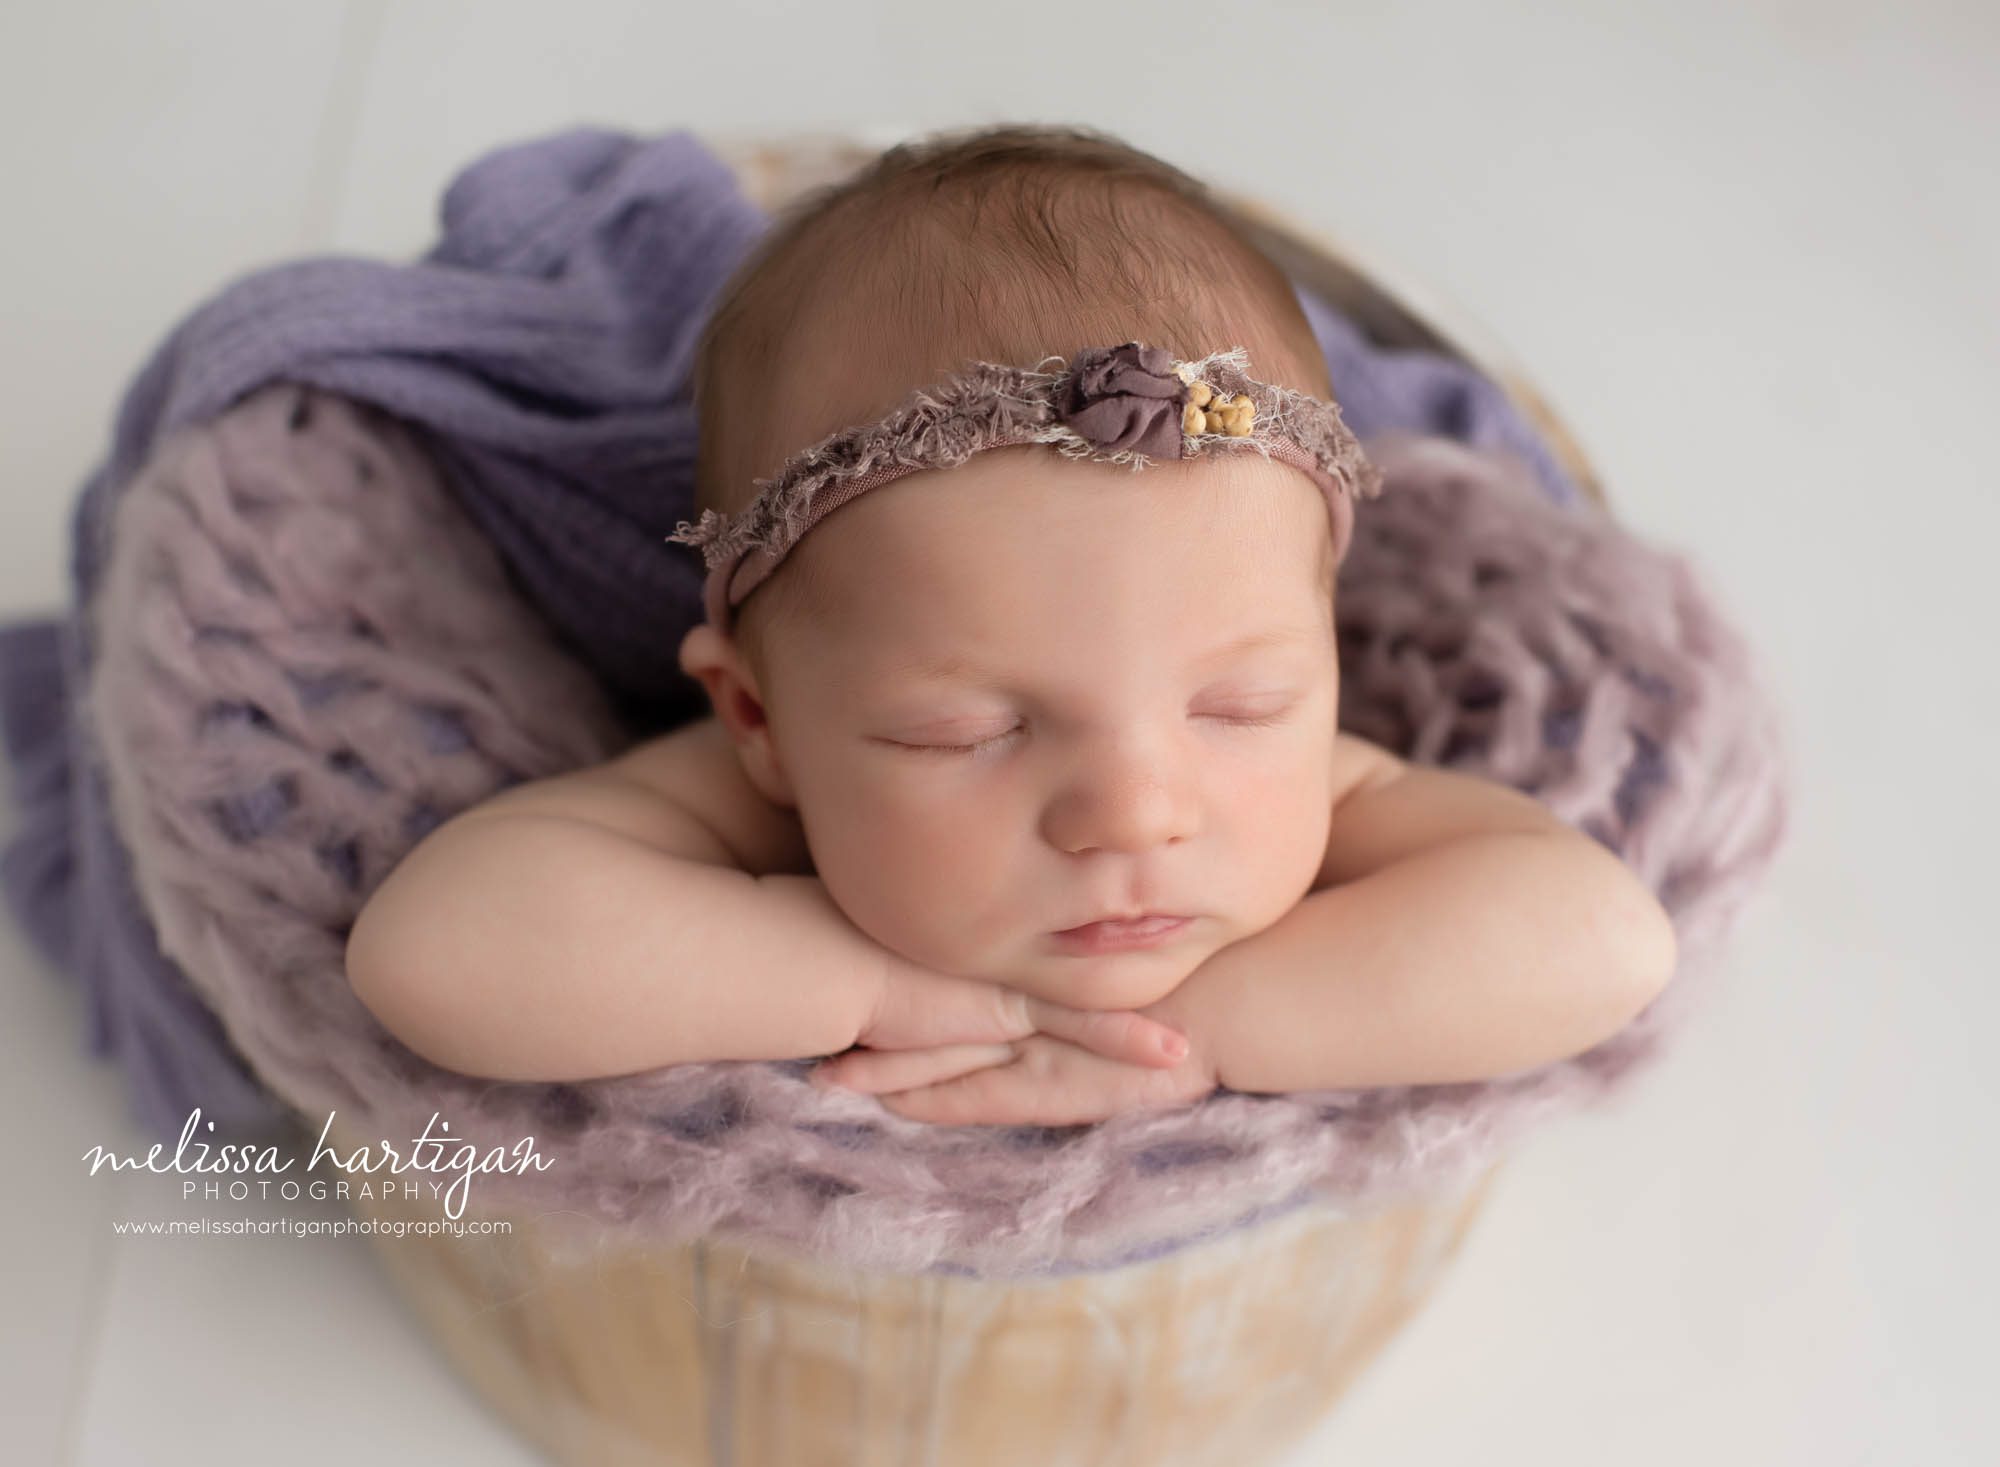 newborn baby girl posed in wooden bucket with purple chunky knitted layer and purple wrap chin resting on hands pose newborn photography